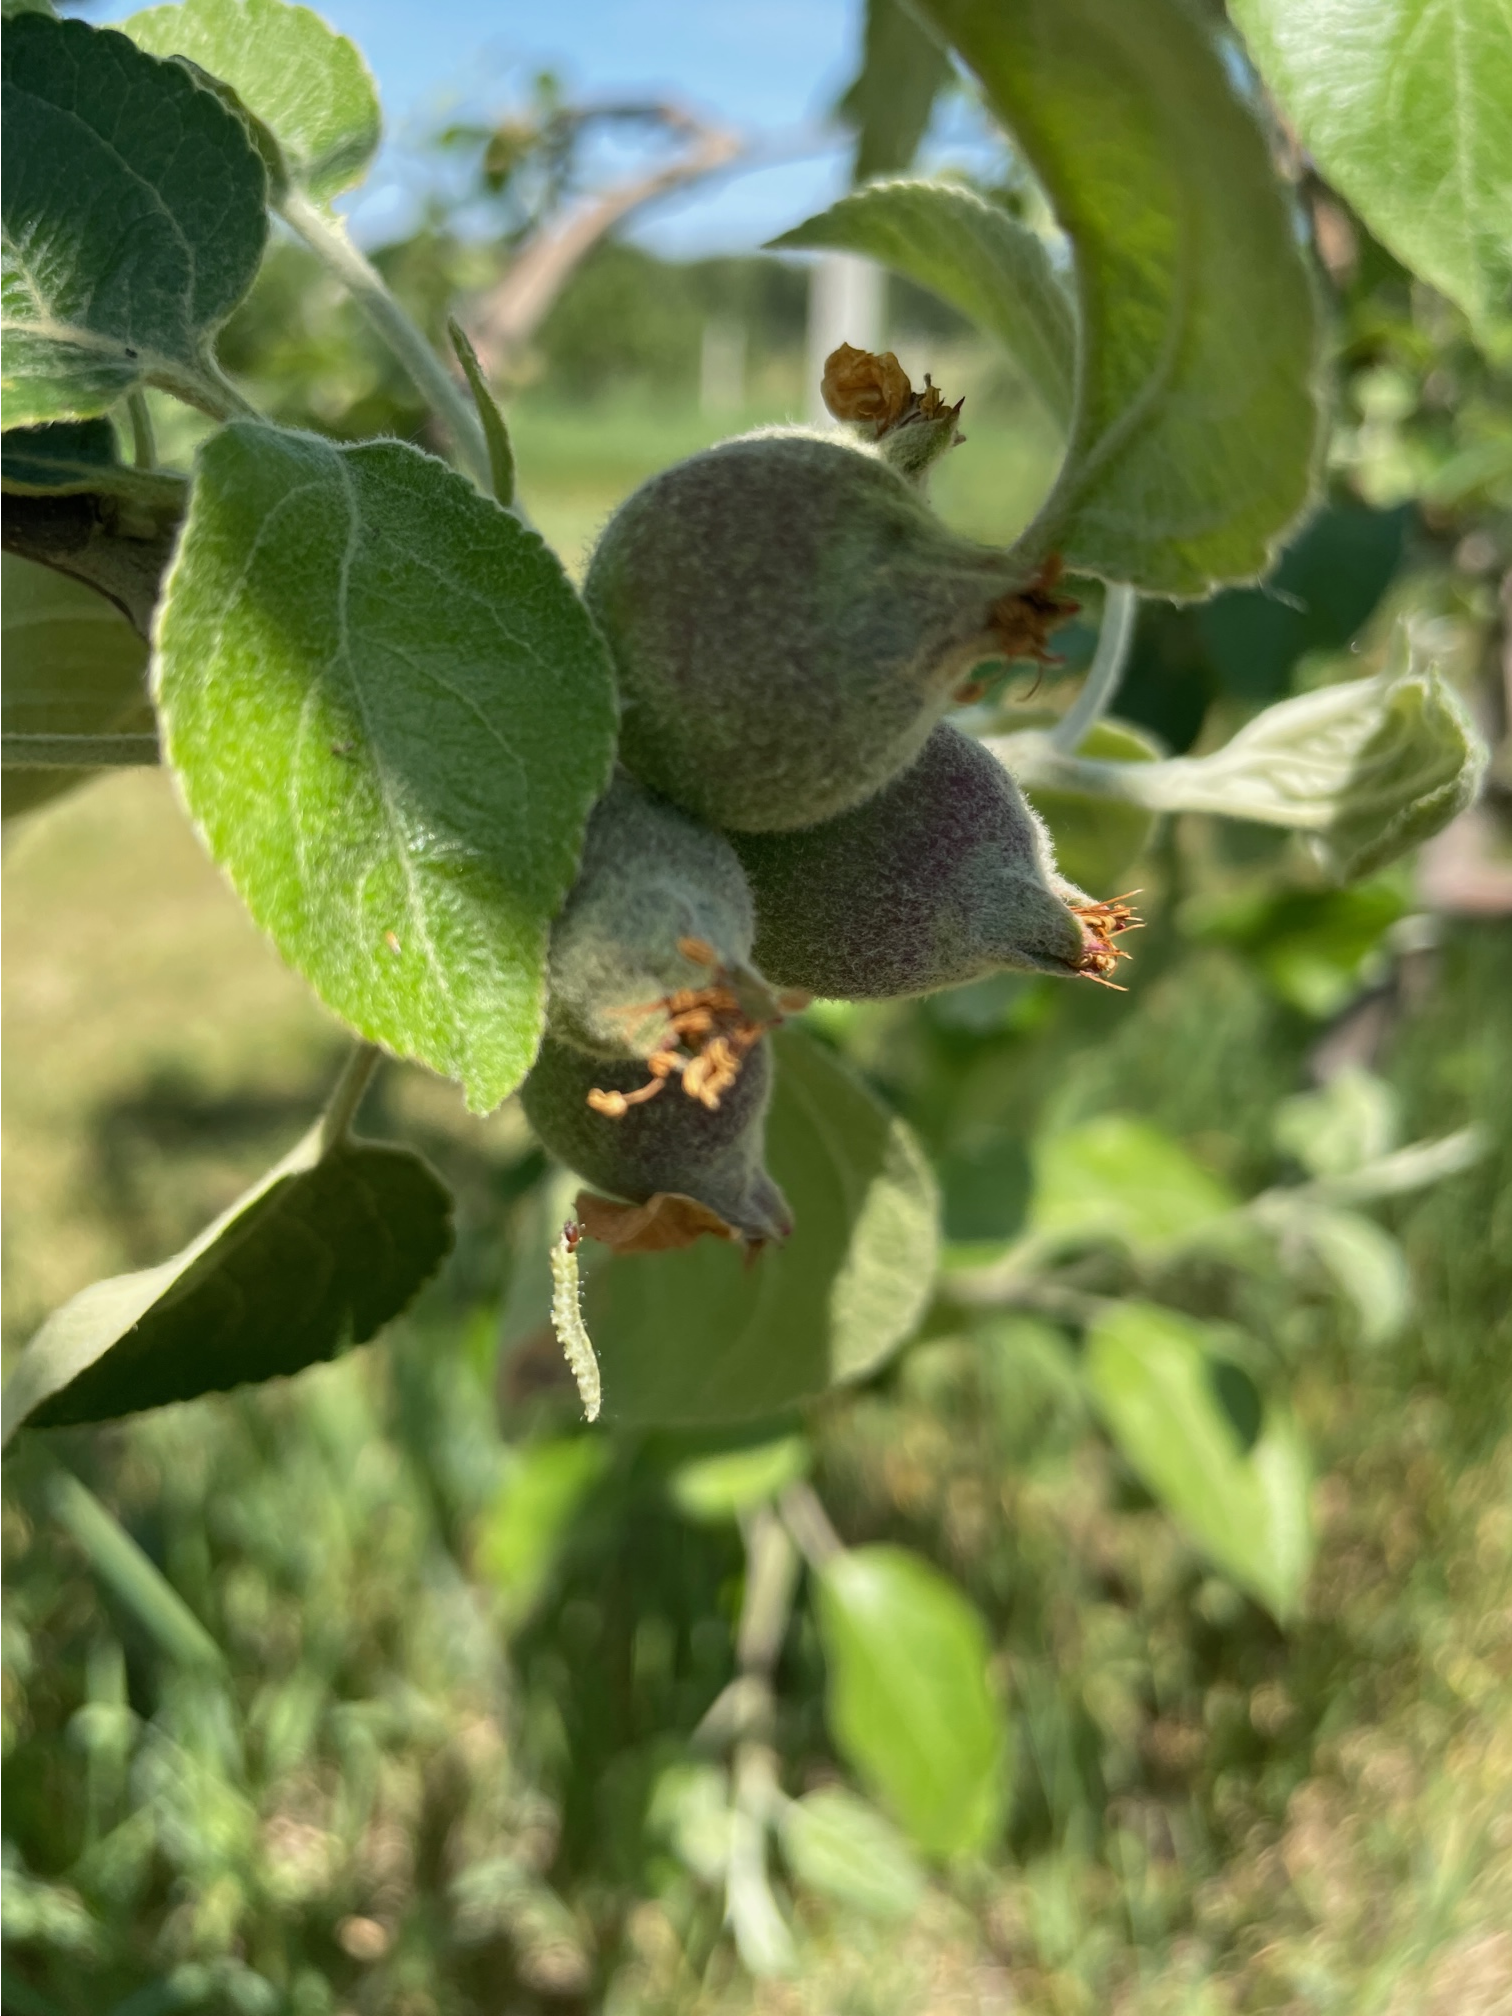 Damage to apples from an insect.